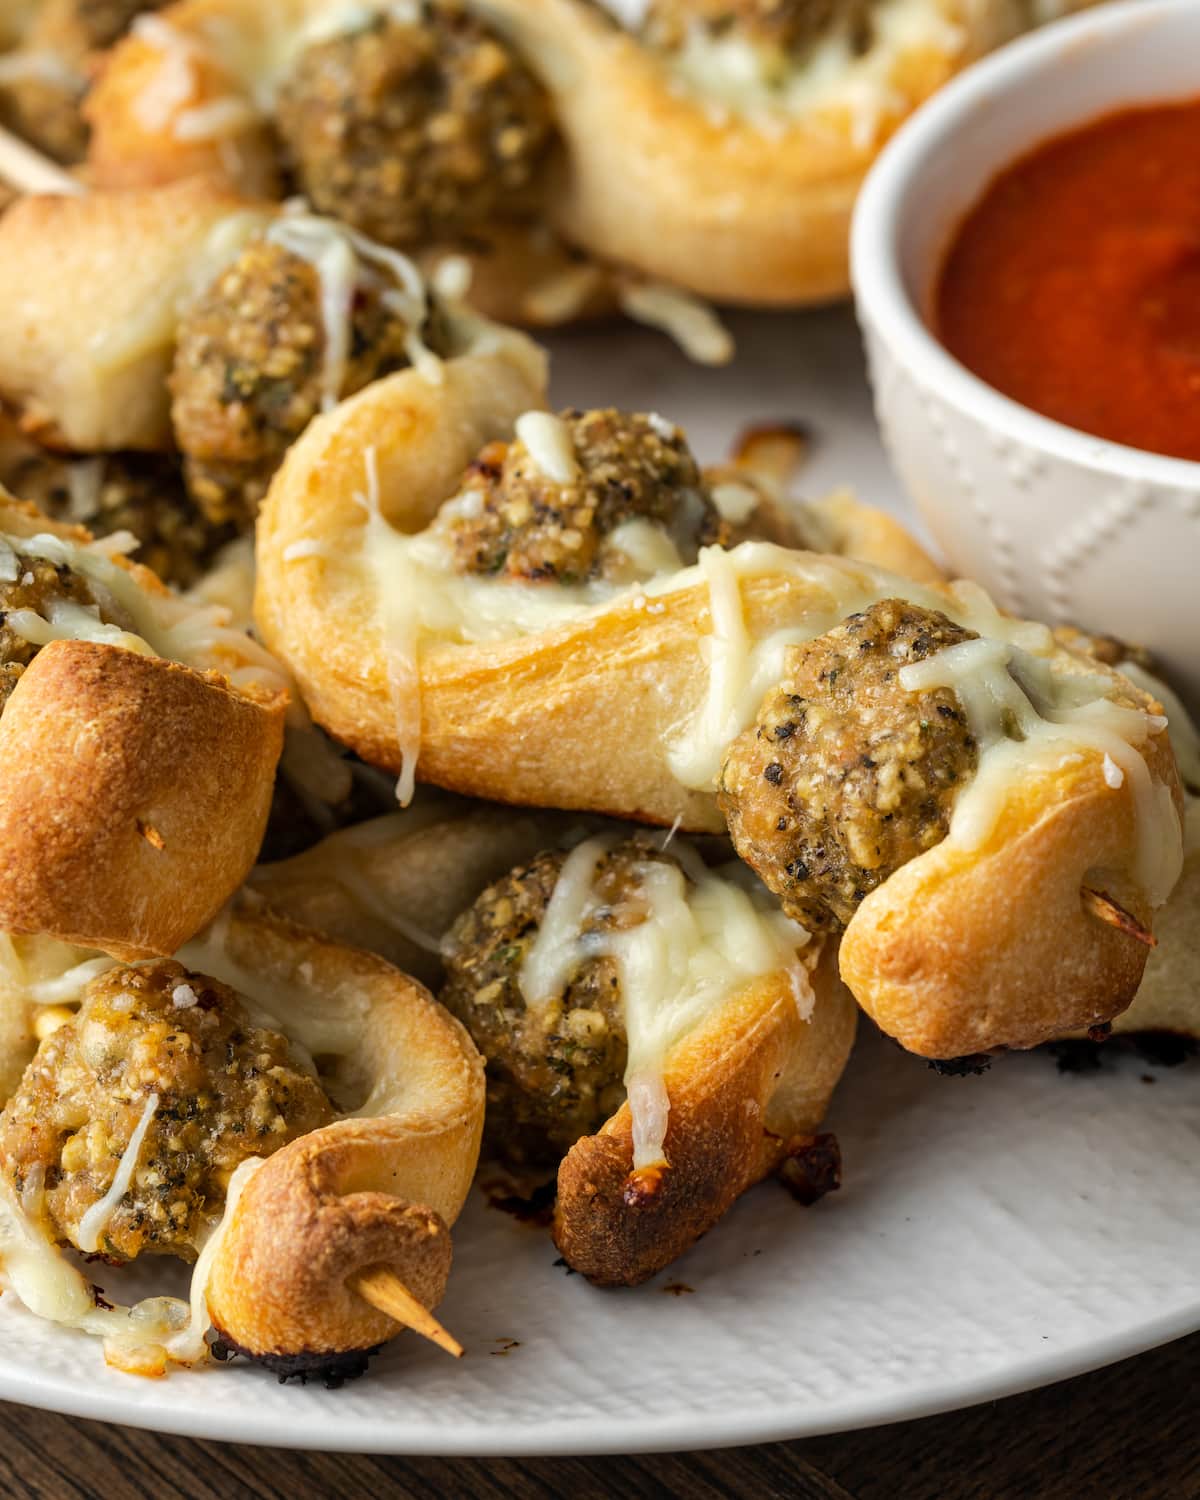 A plate of meatball subs on a stick with a bowl of marinara sauce.